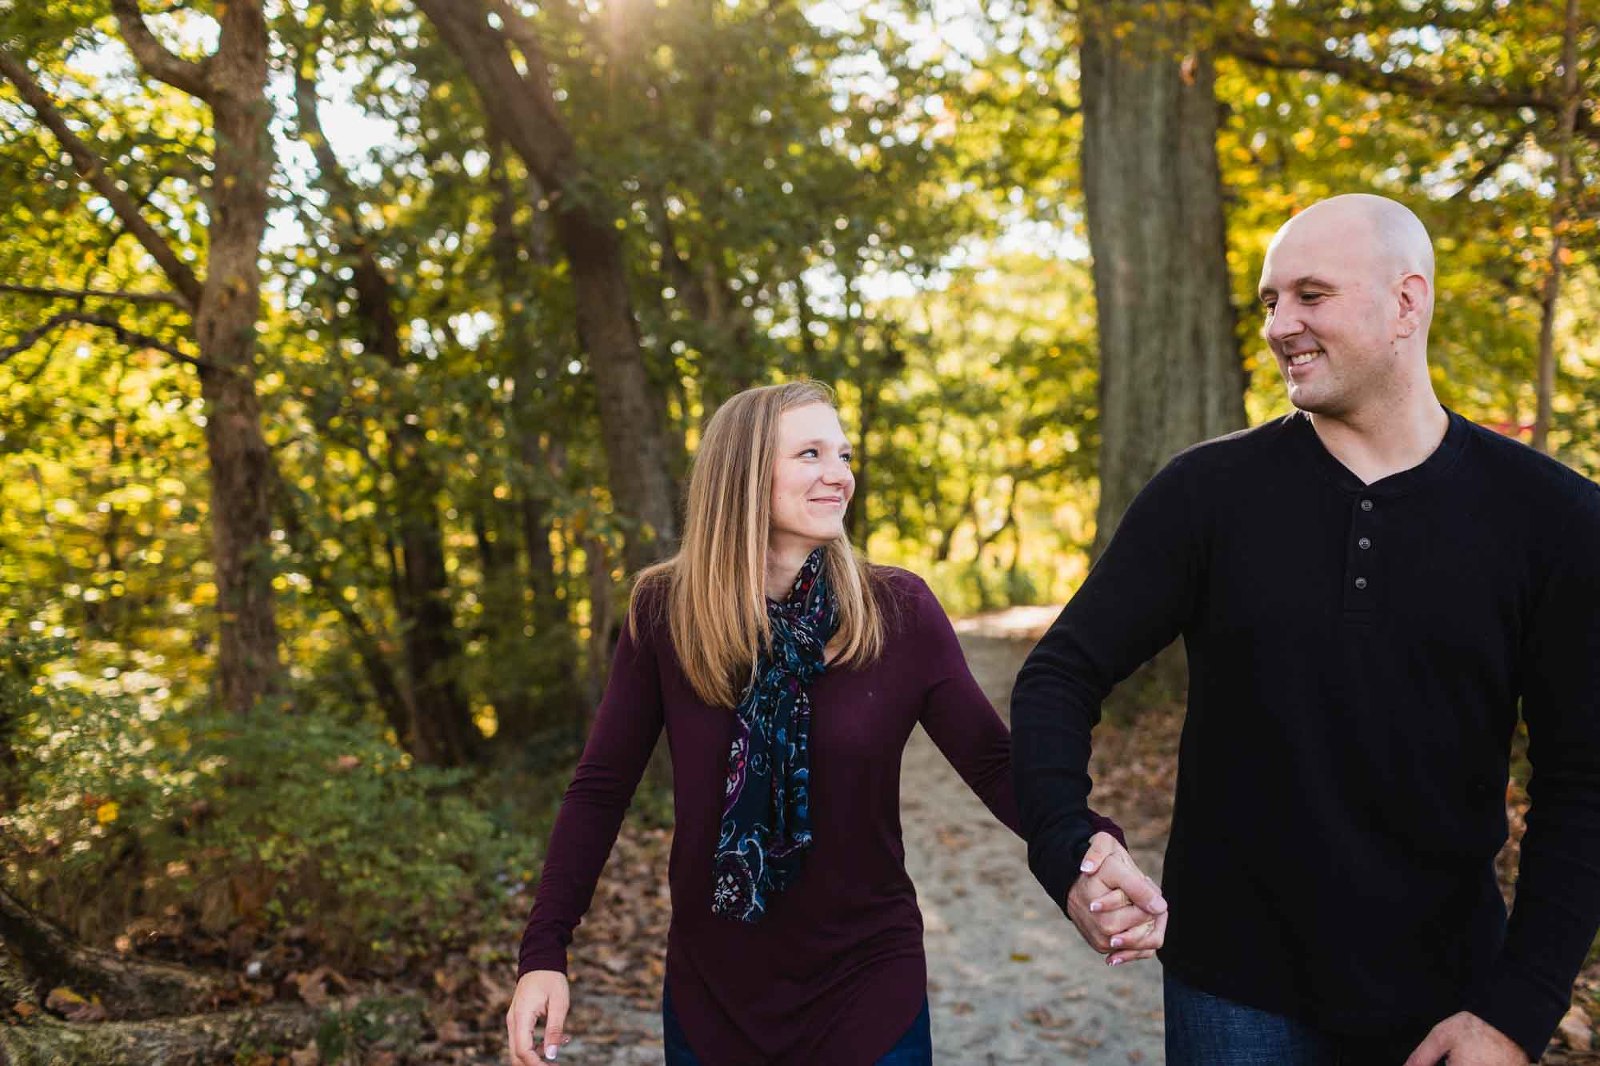 woman and man holding hands and walking a path in the woods, smiling at each other